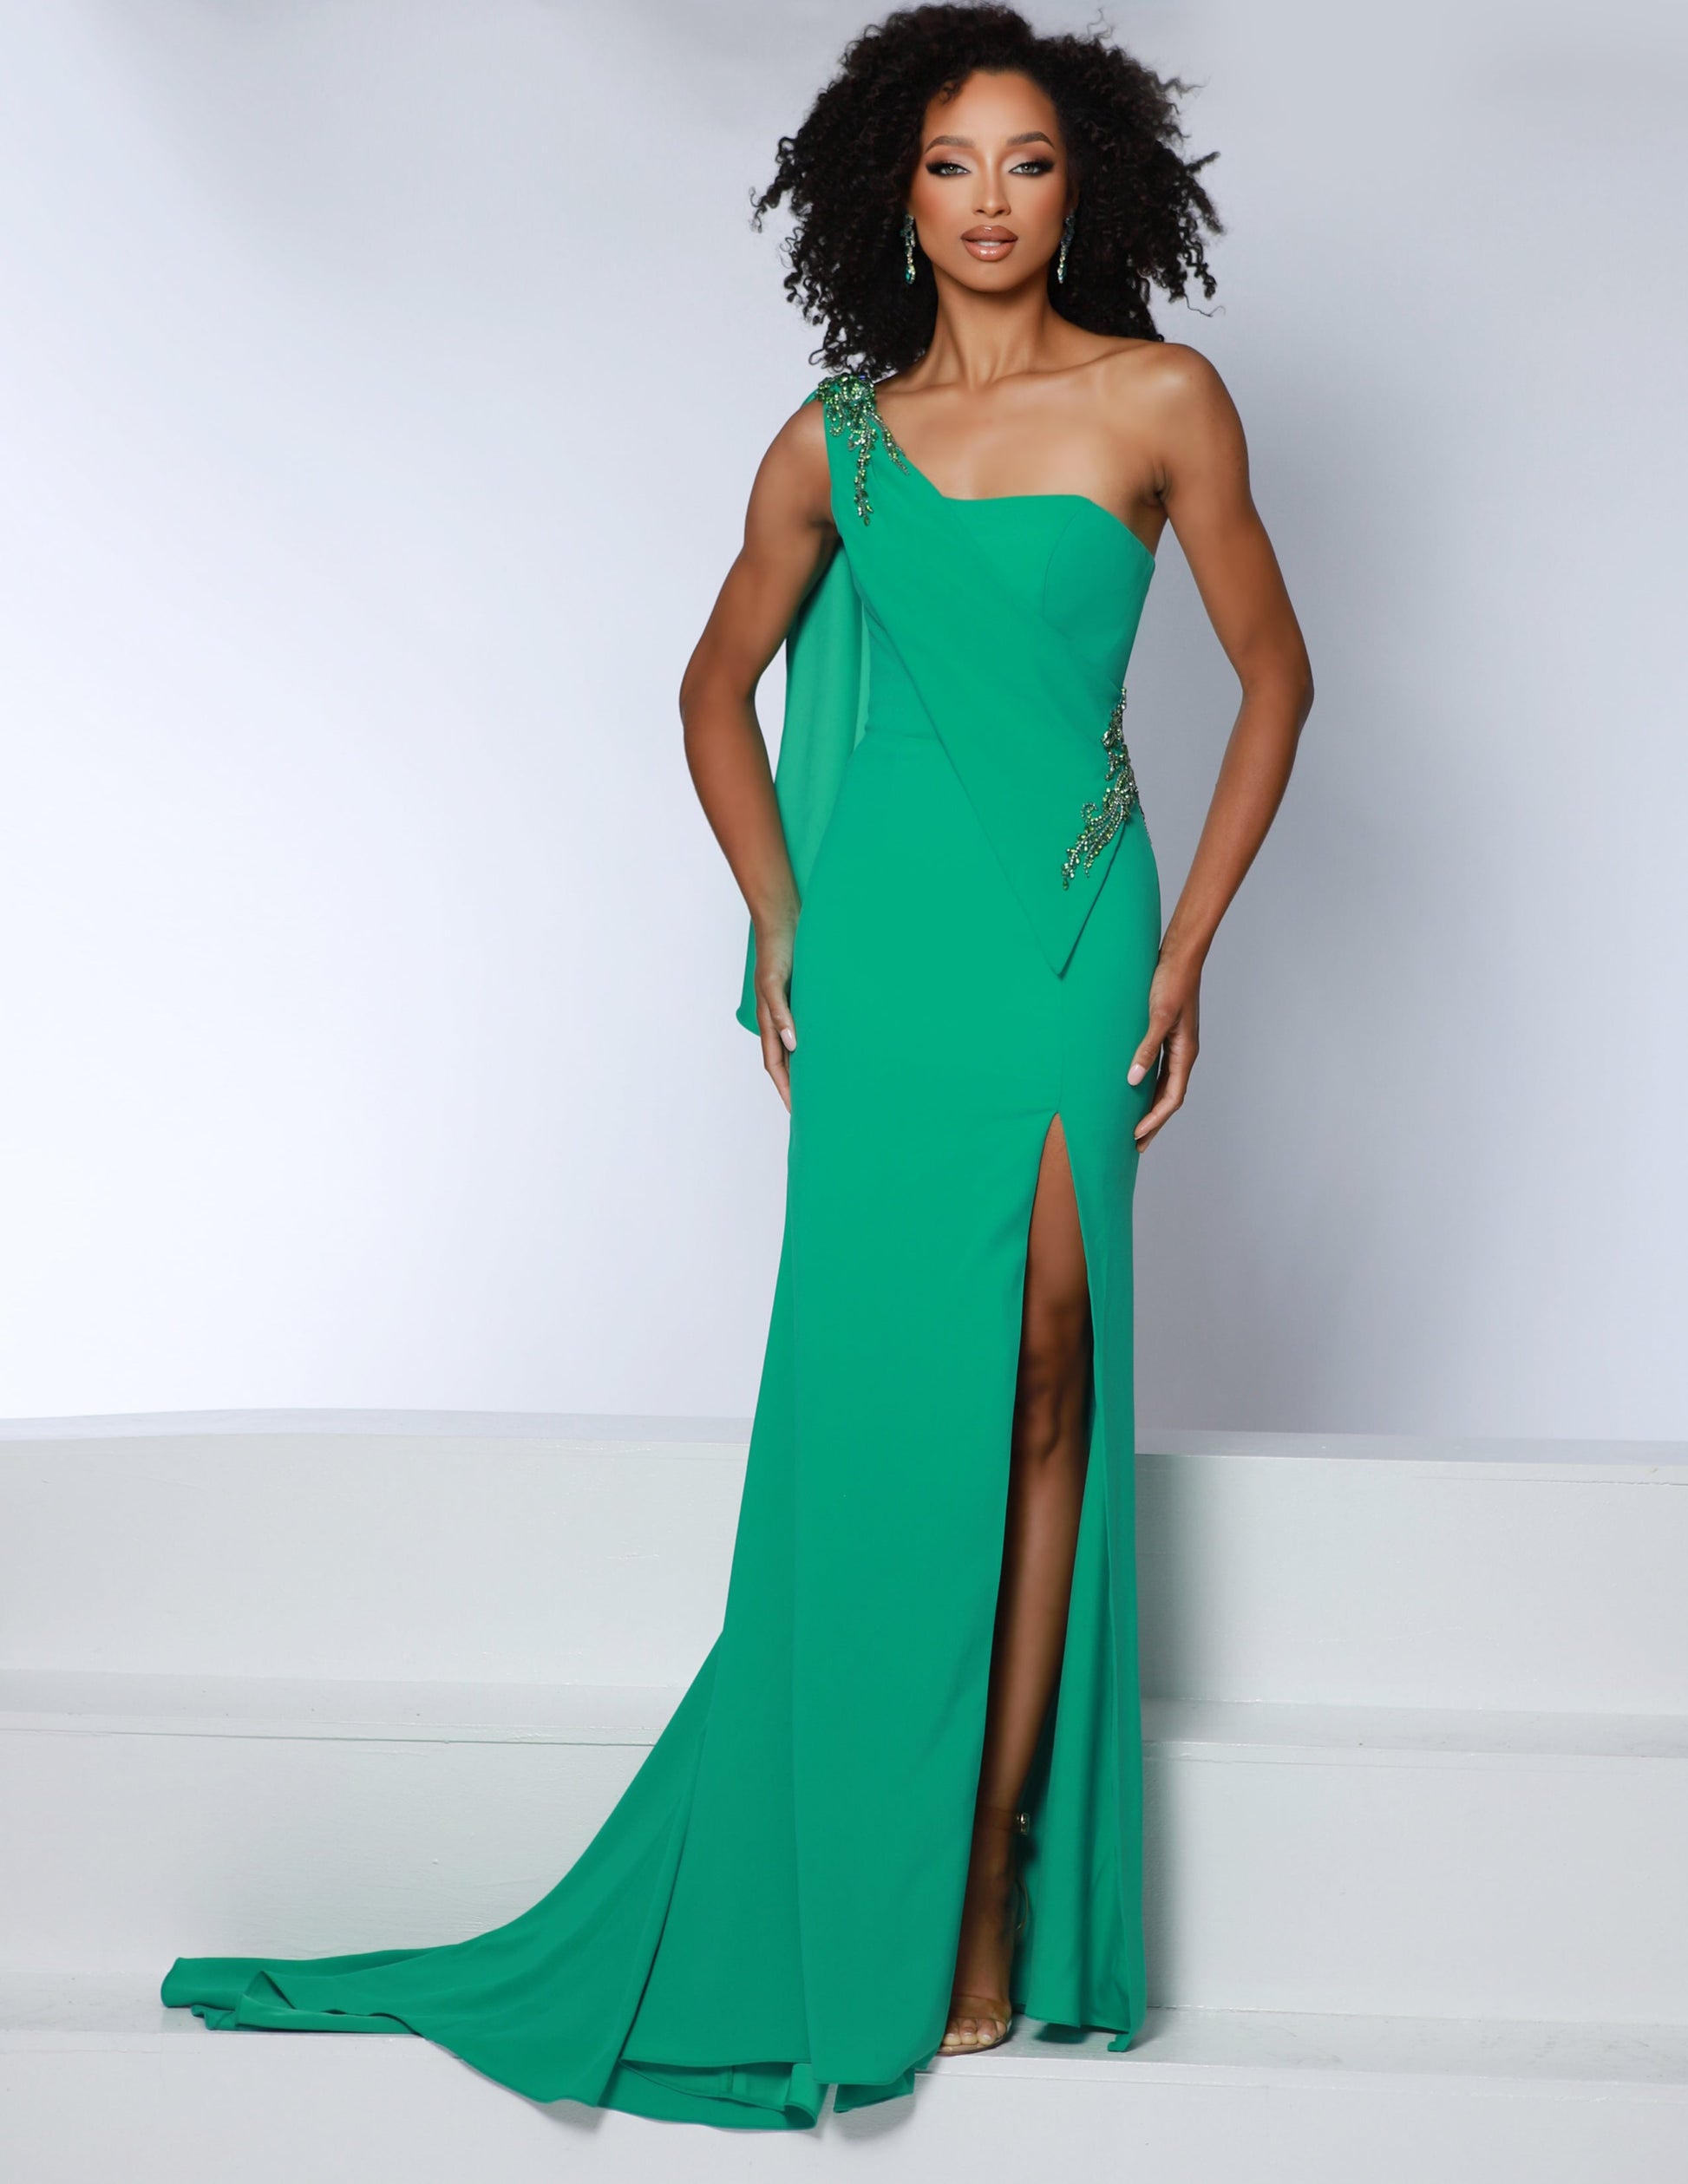 The Johnathan Kayne 2864 long prom dress features a one-shoulder silhouette and crepe fabric with encrusted crystals for an elegant look. The slit tail and high side slit add a touch of drama to make a lasting impression. This formal and pageant gown is perfect for special occasions. Get ready to take the crown in our one-shoulder stretch crepe gown. Adorned with stunning encrusted crystals on the one shoulder bodice and side, this gown is a regal masterpiece of style and grace. 